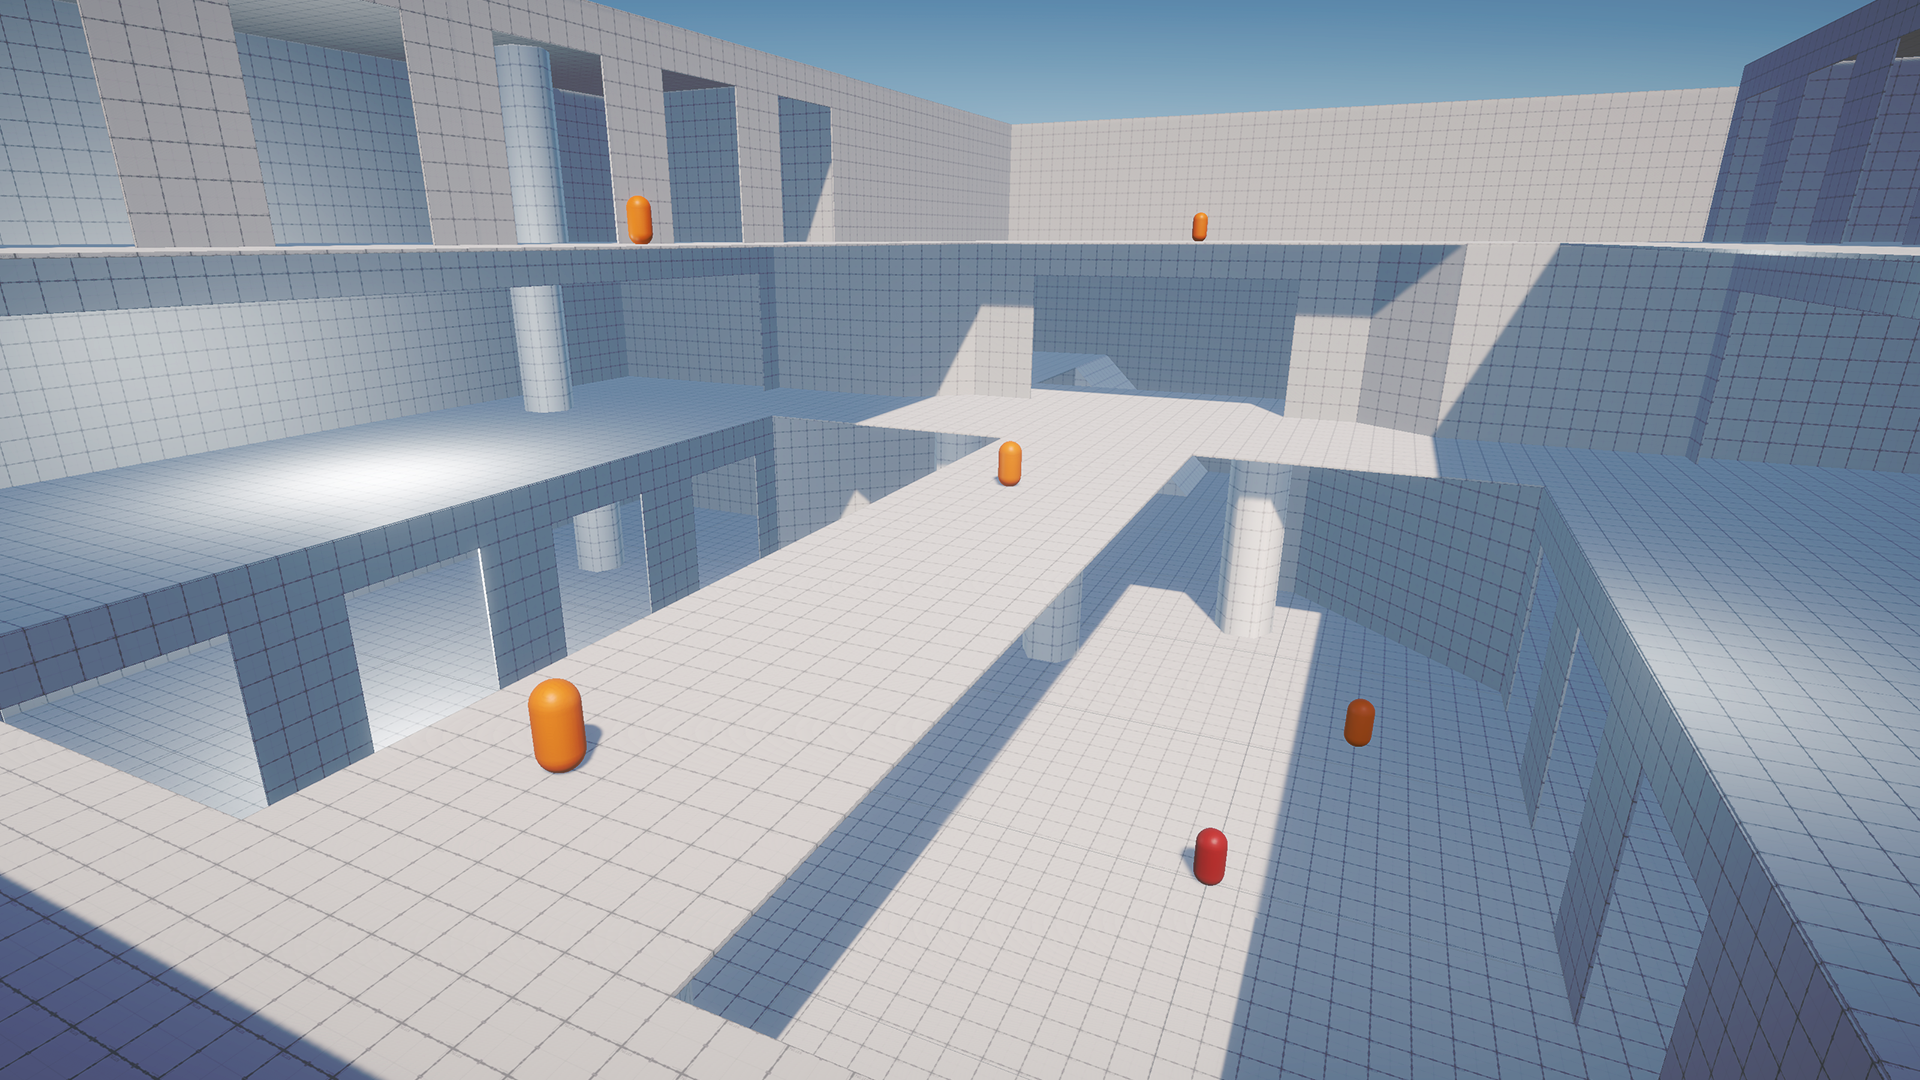 Sample game environment showing a tiled space with multiple levels, or floors, and pill-shaped objects placed at different tiers